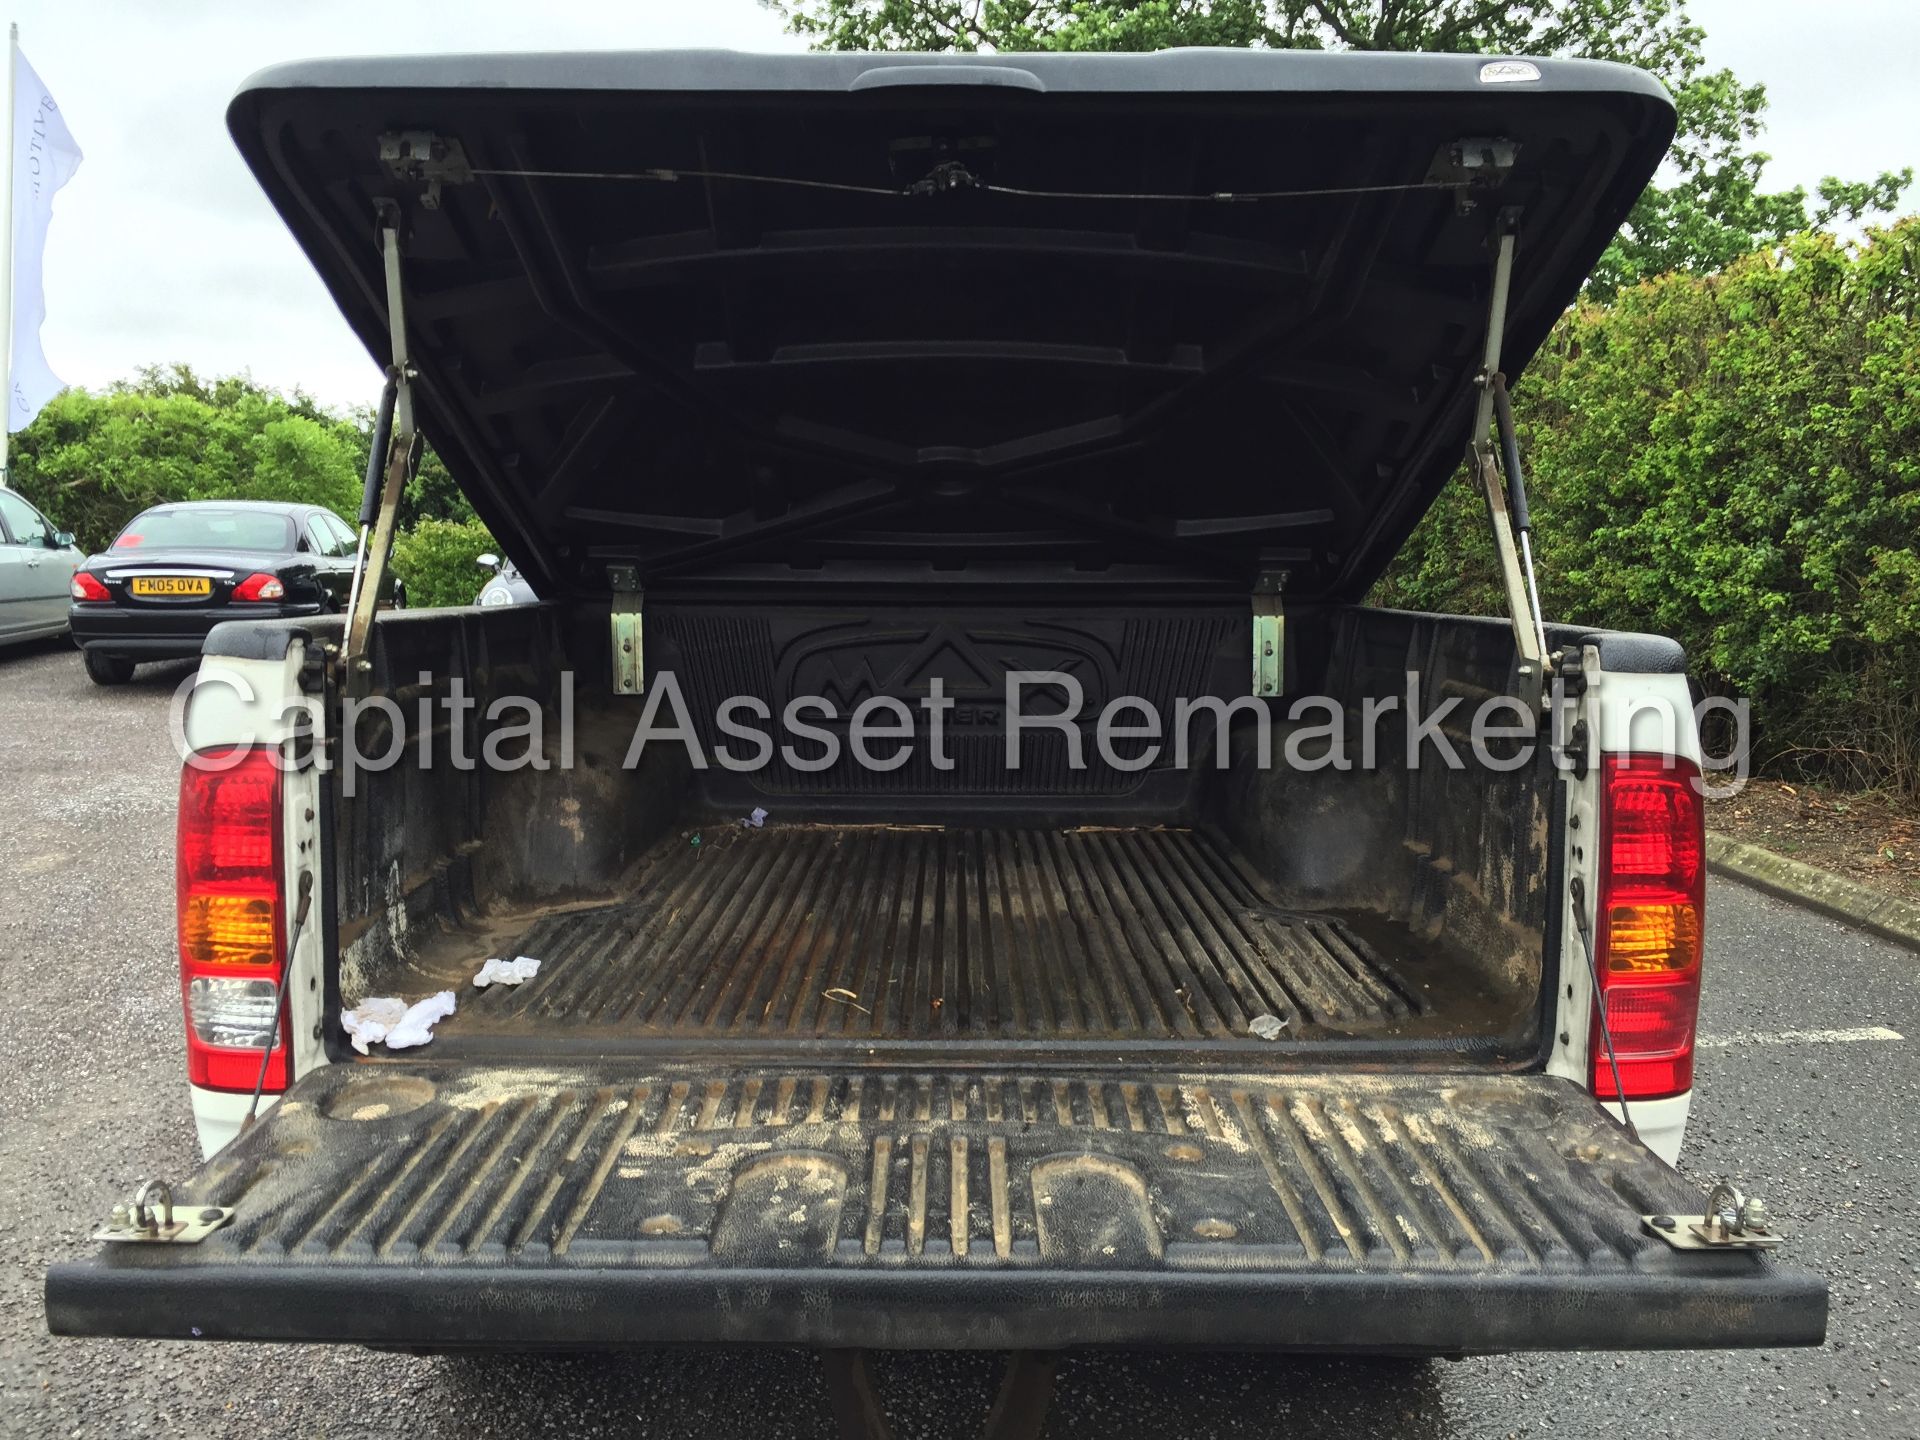 TOYOTA HILUX D-4D '171 BHP' (2008 - 08 REG) DOUBLE CAB PICK-UP (1 OWNER FROM NEW) - Image 14 of 23